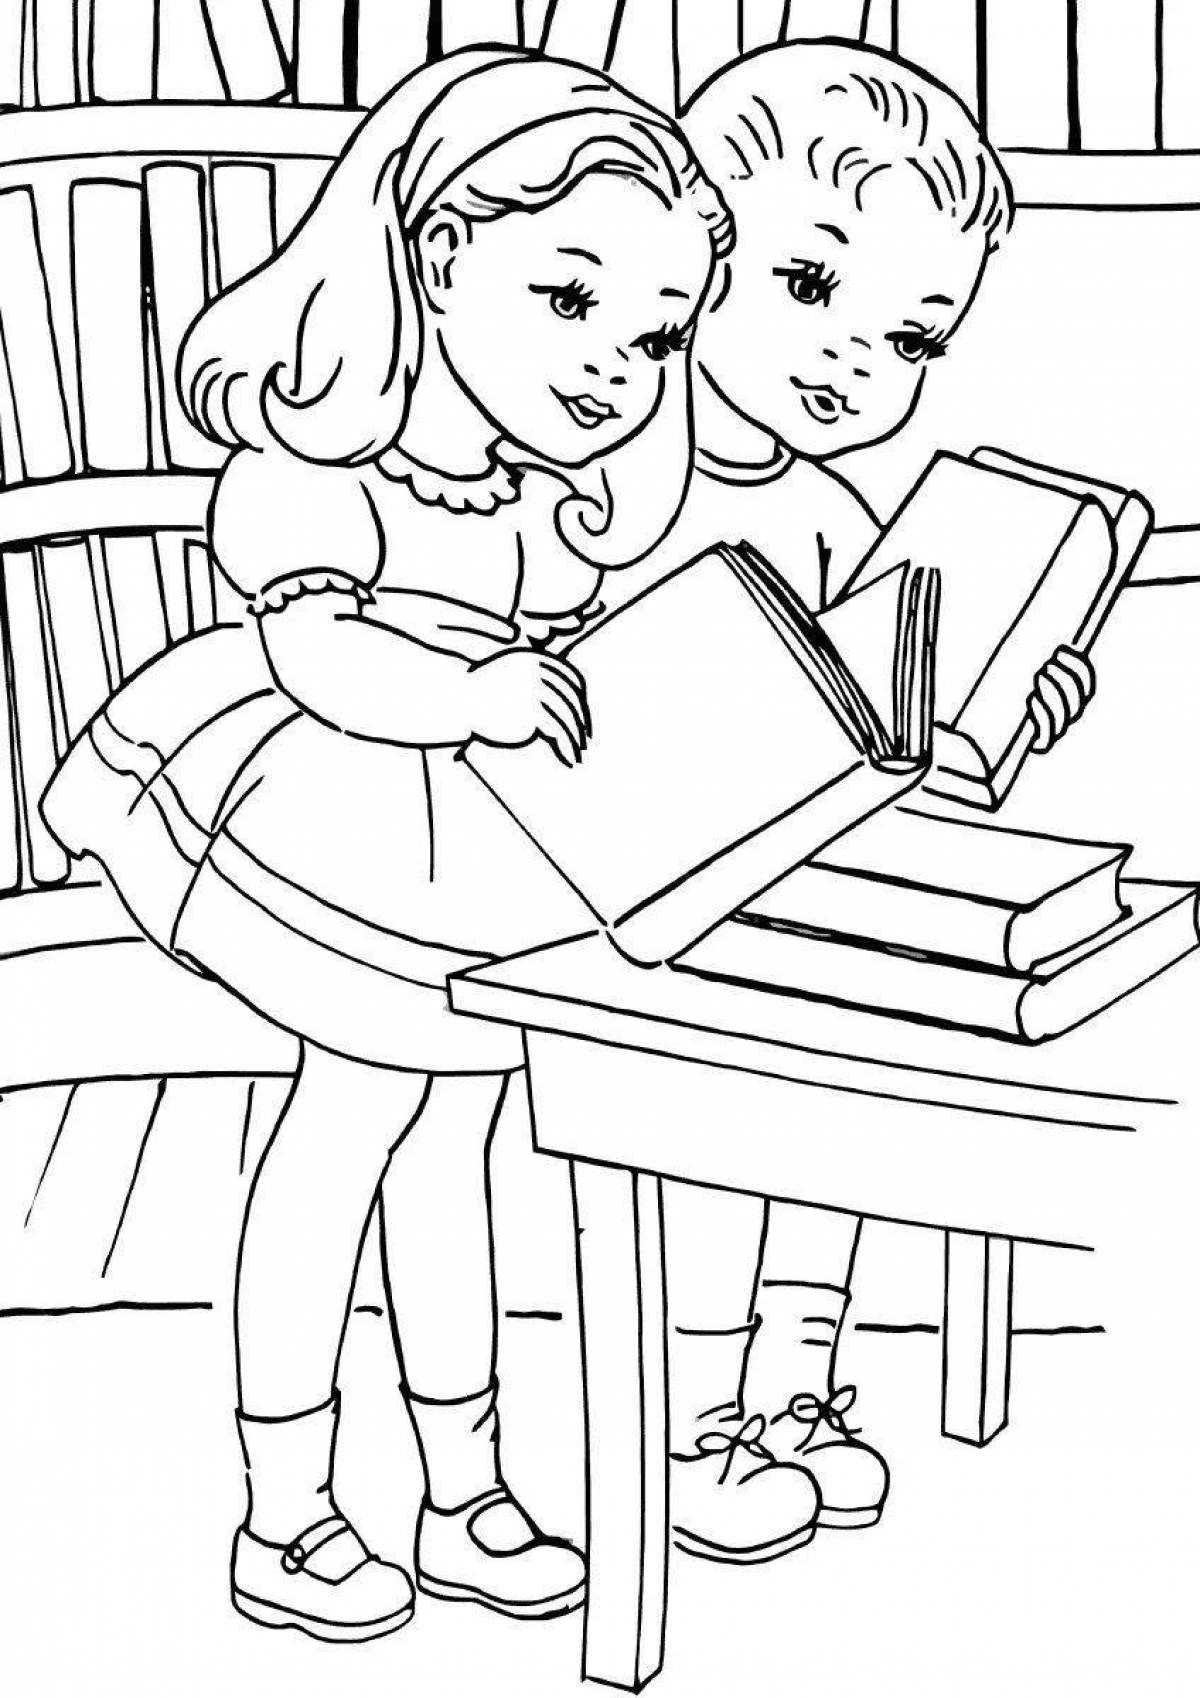 Playful library coloring page